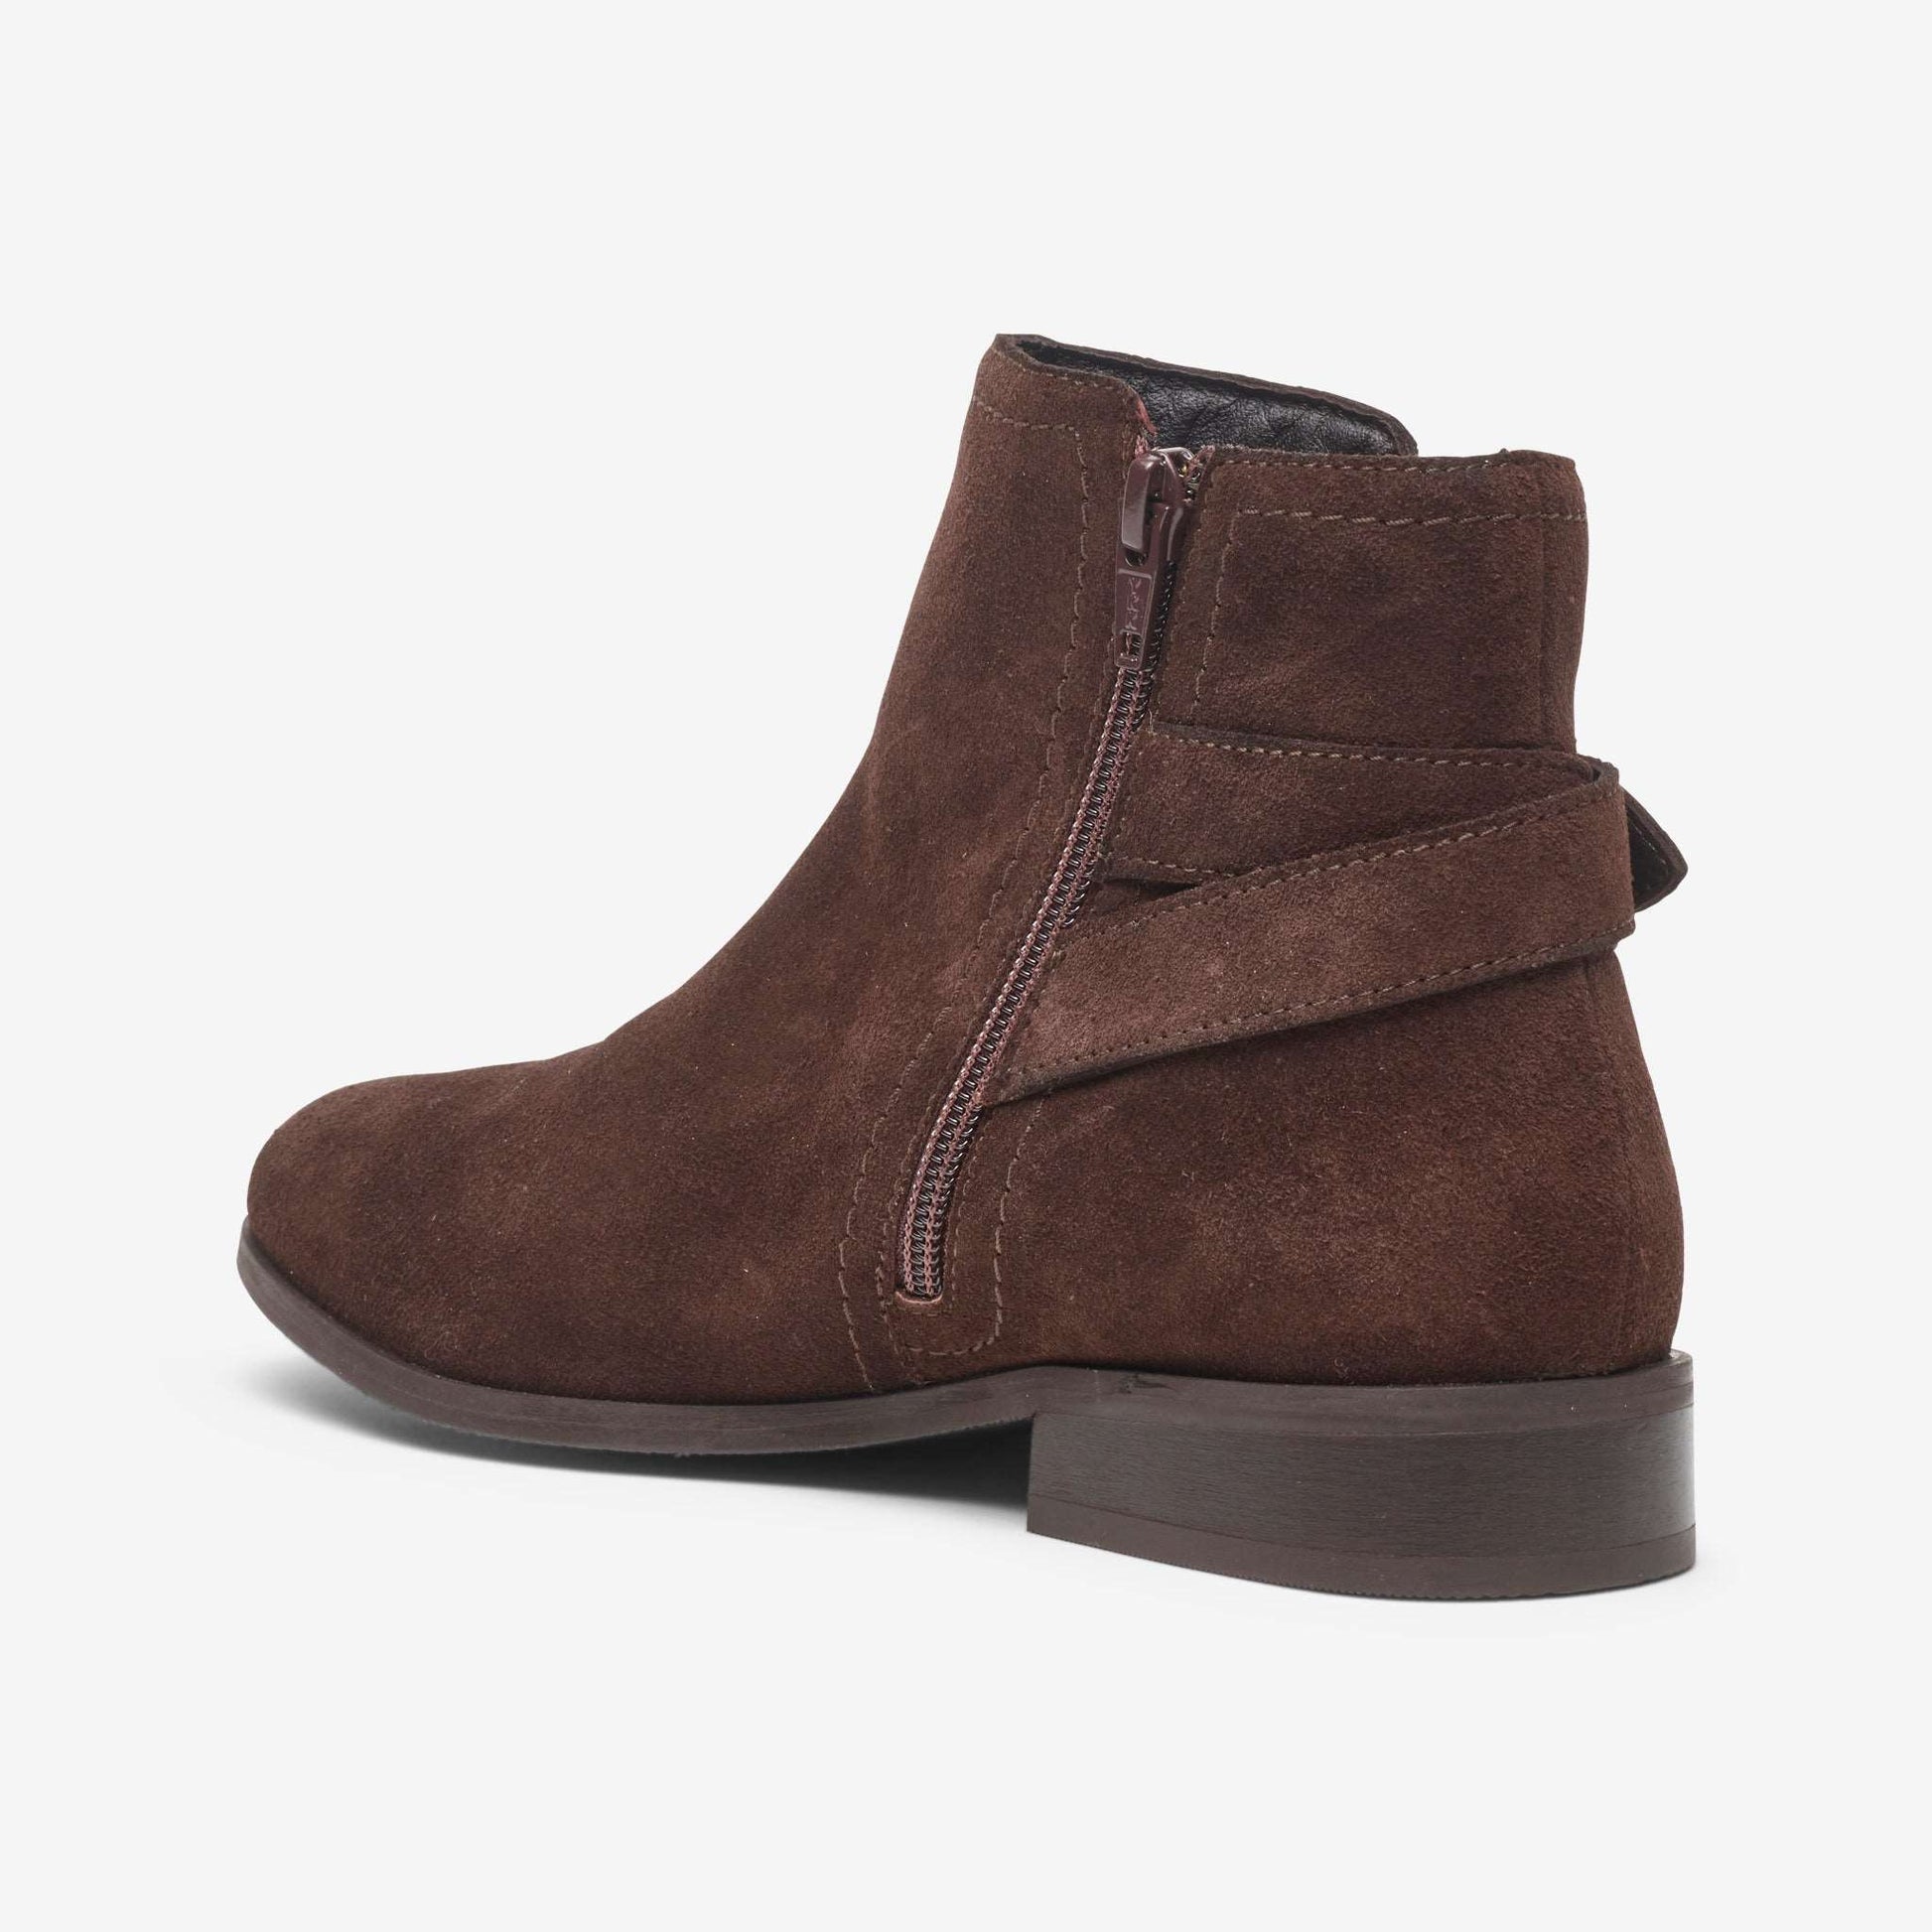 Rear view of wide fit brown suede ankle boot with strap and buckle detail